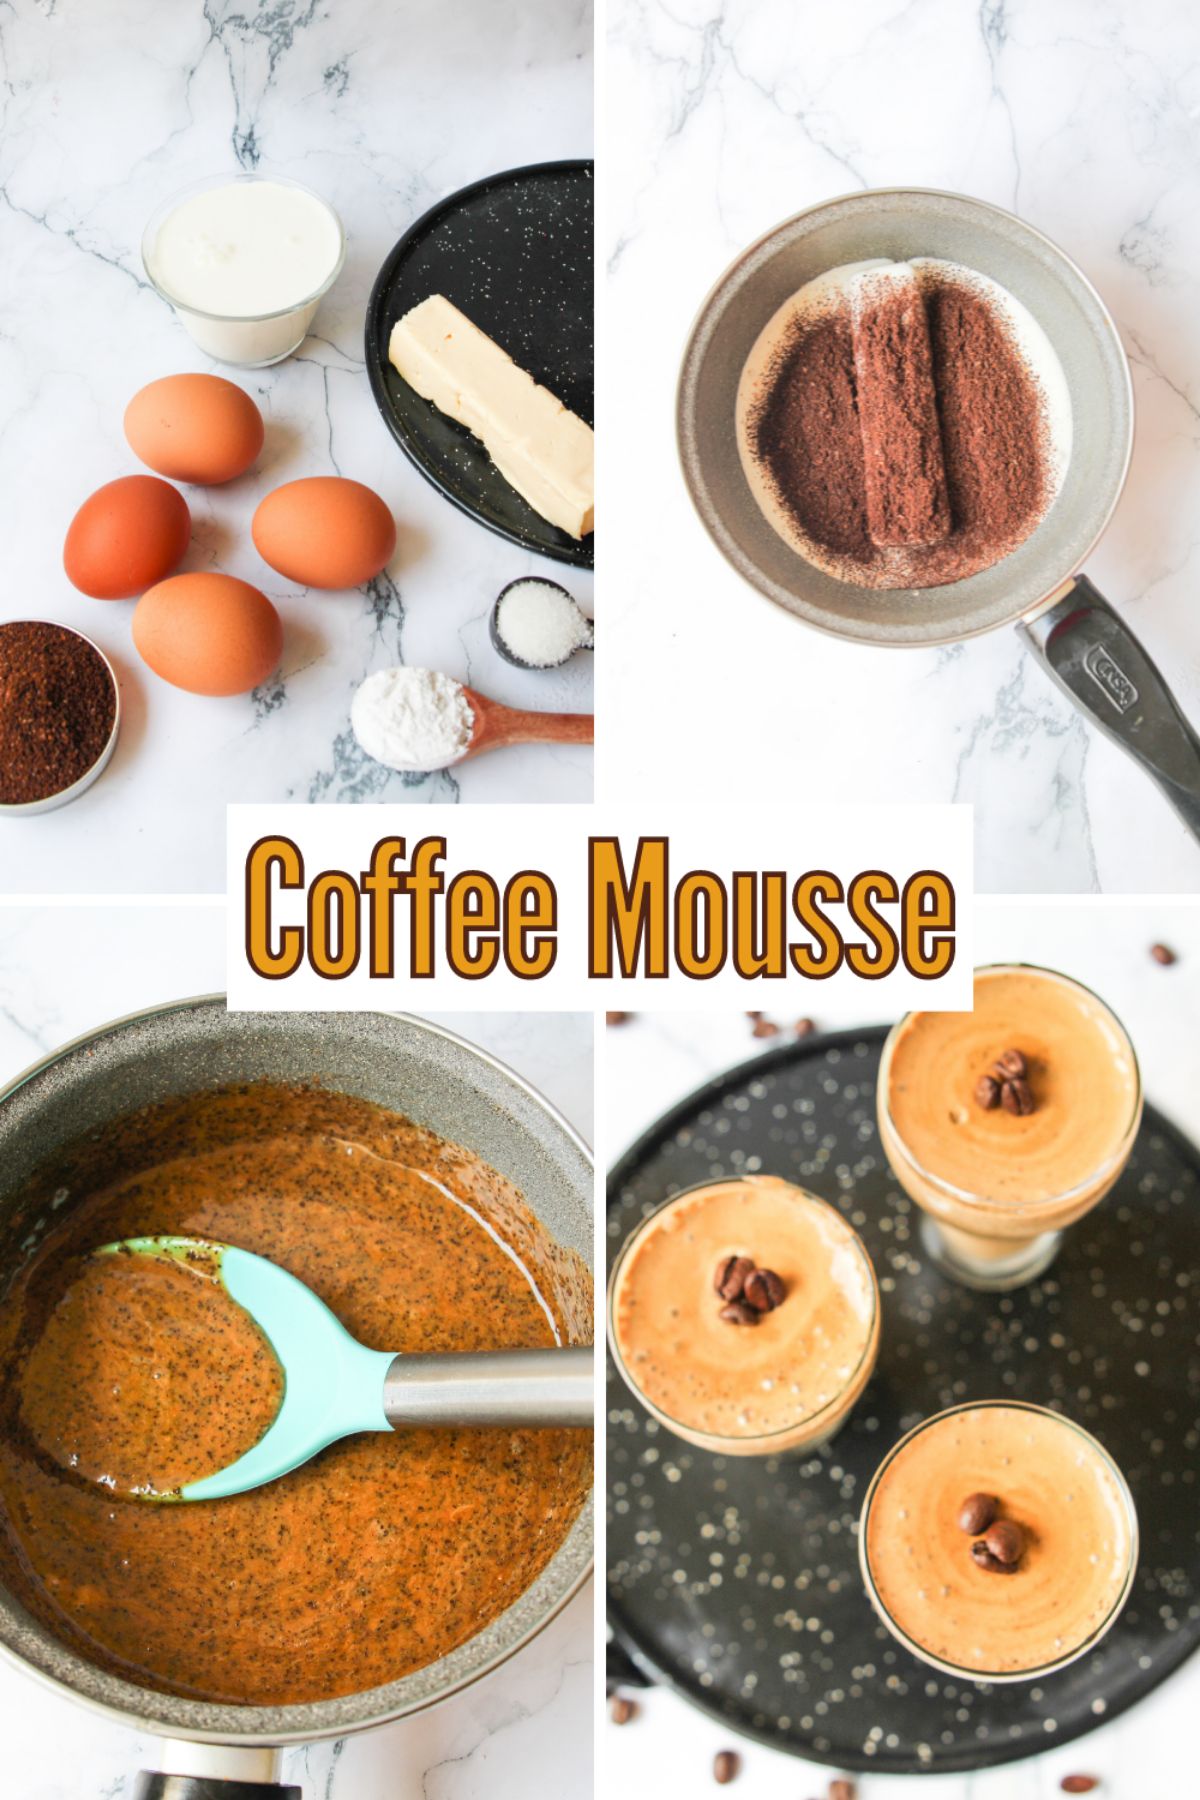 Coffee Mousse is a light and fluffy mousse and makes a quick and delicious coffee-flavored dessert. This mousse is very simple to make. #coffeemousse #coffee #mousse #dessert #recipe via @wondermomwannab